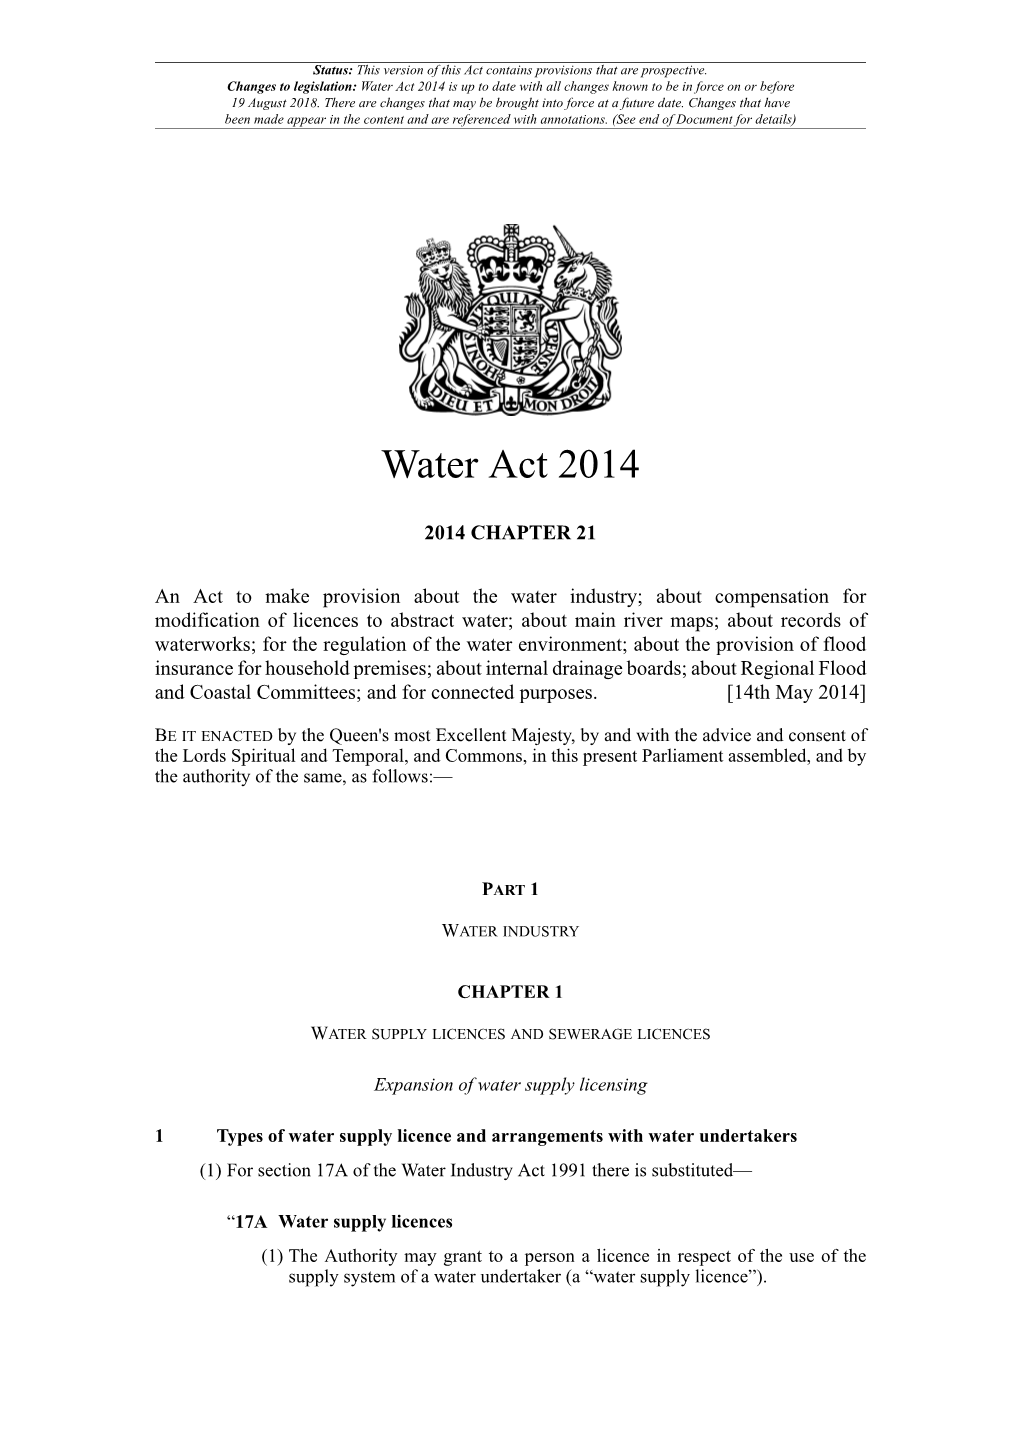 Water Act 2014 Is up to Date with All Changes Known to Be in Force on Or Before 19 August 2018